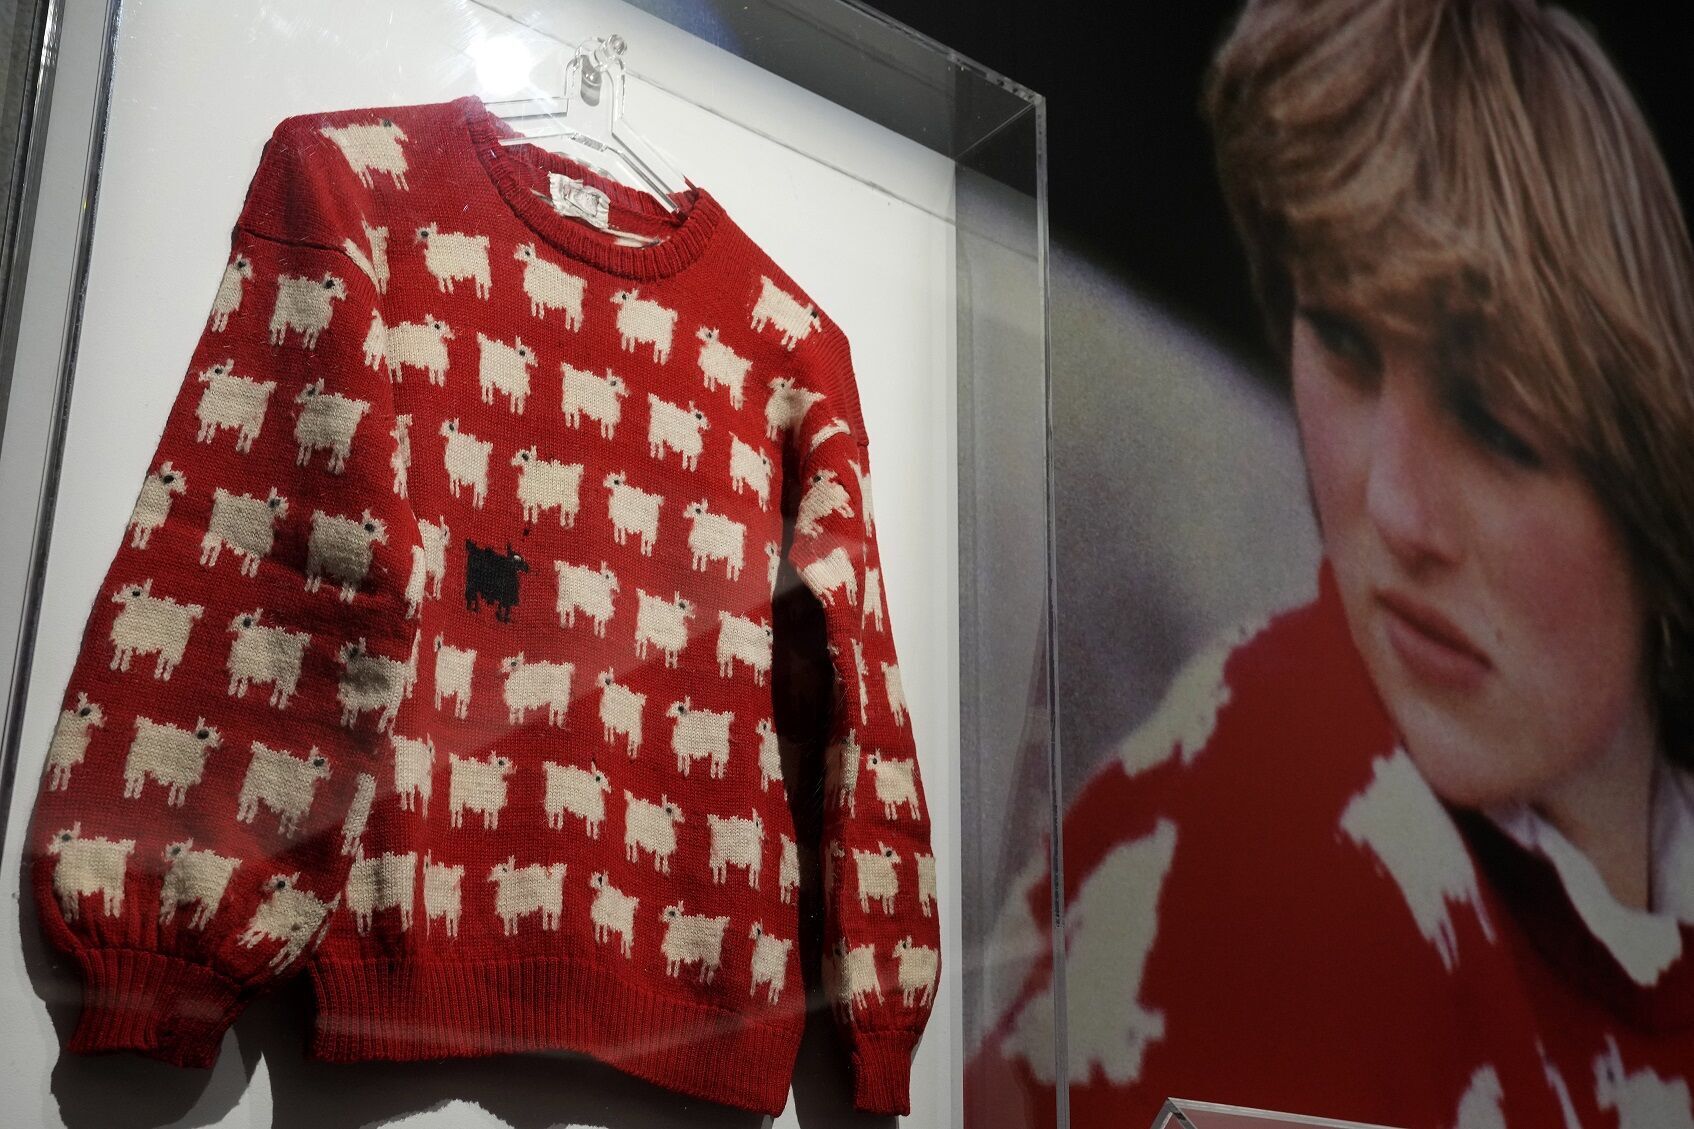 Princess Diana's sheep sweater sells for record $1.1M